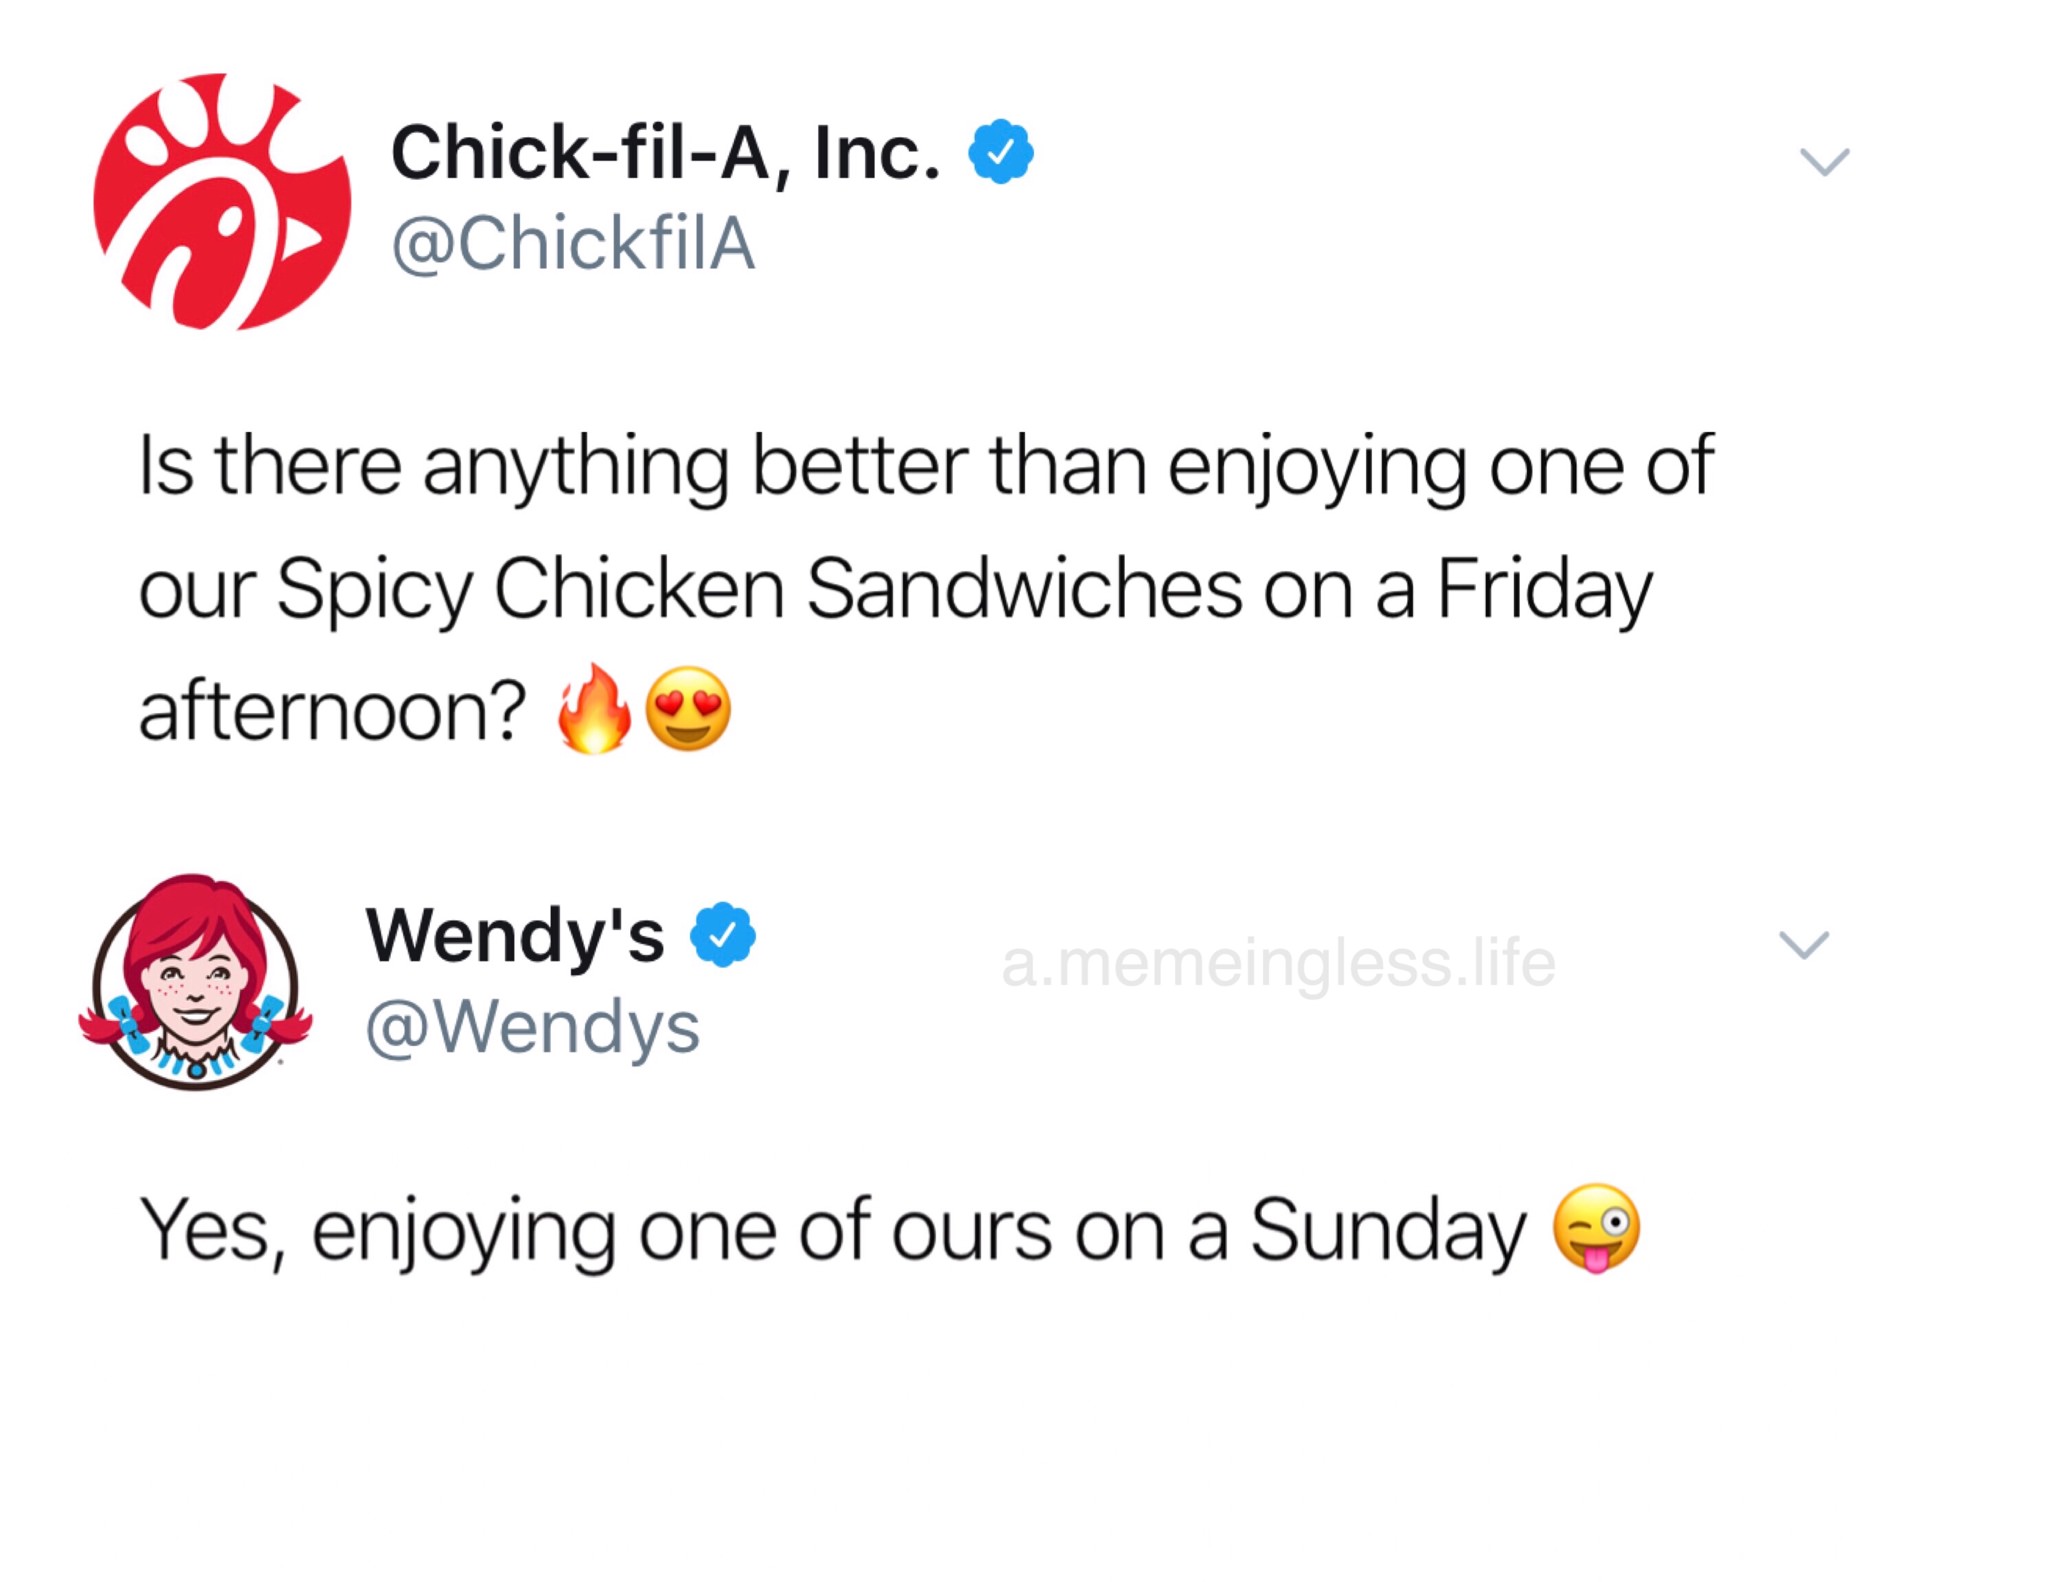 chick fil a wendy's twitter - ChickfilA, Inc. Is there anything better than enjoying one of our Spicy Chicken Sandwiches on a Friday afternoon? Wendy's a.memeingless.life Yes, enjoying one of ours on a Sunday